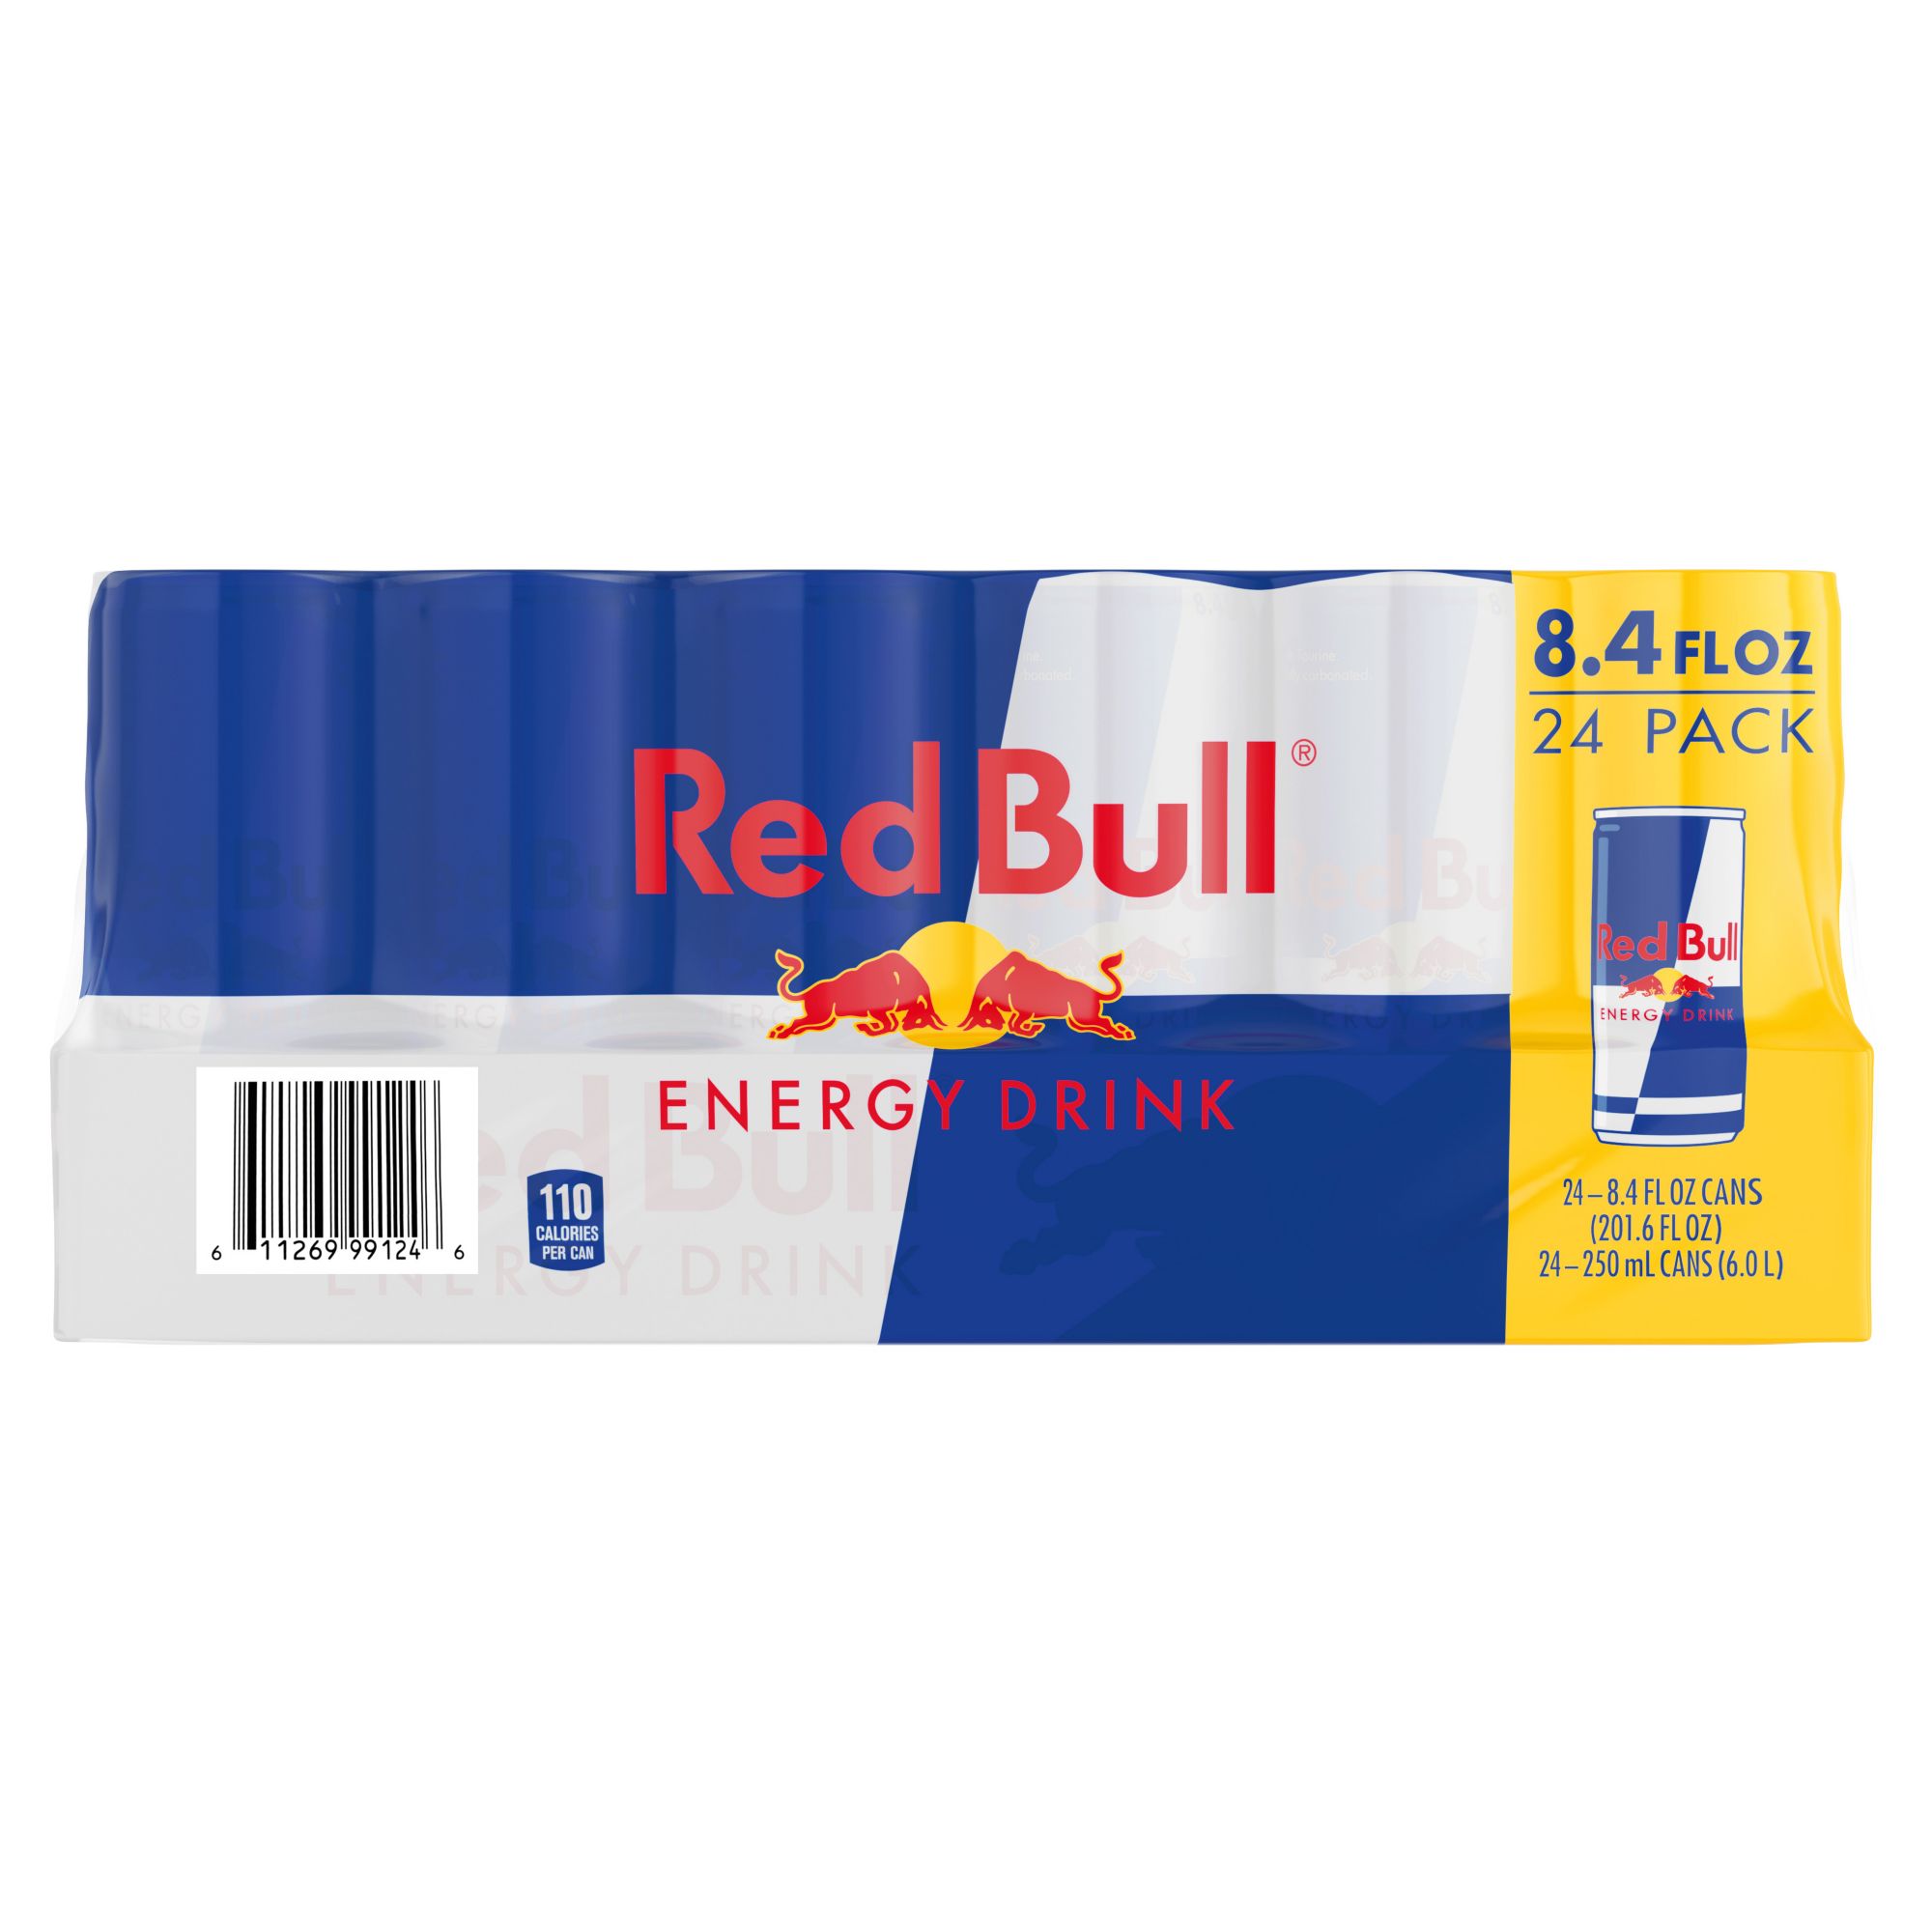 Red Bull Energy 24 Drink, | ct./8.4 Club Wholesale BJ\'s oz